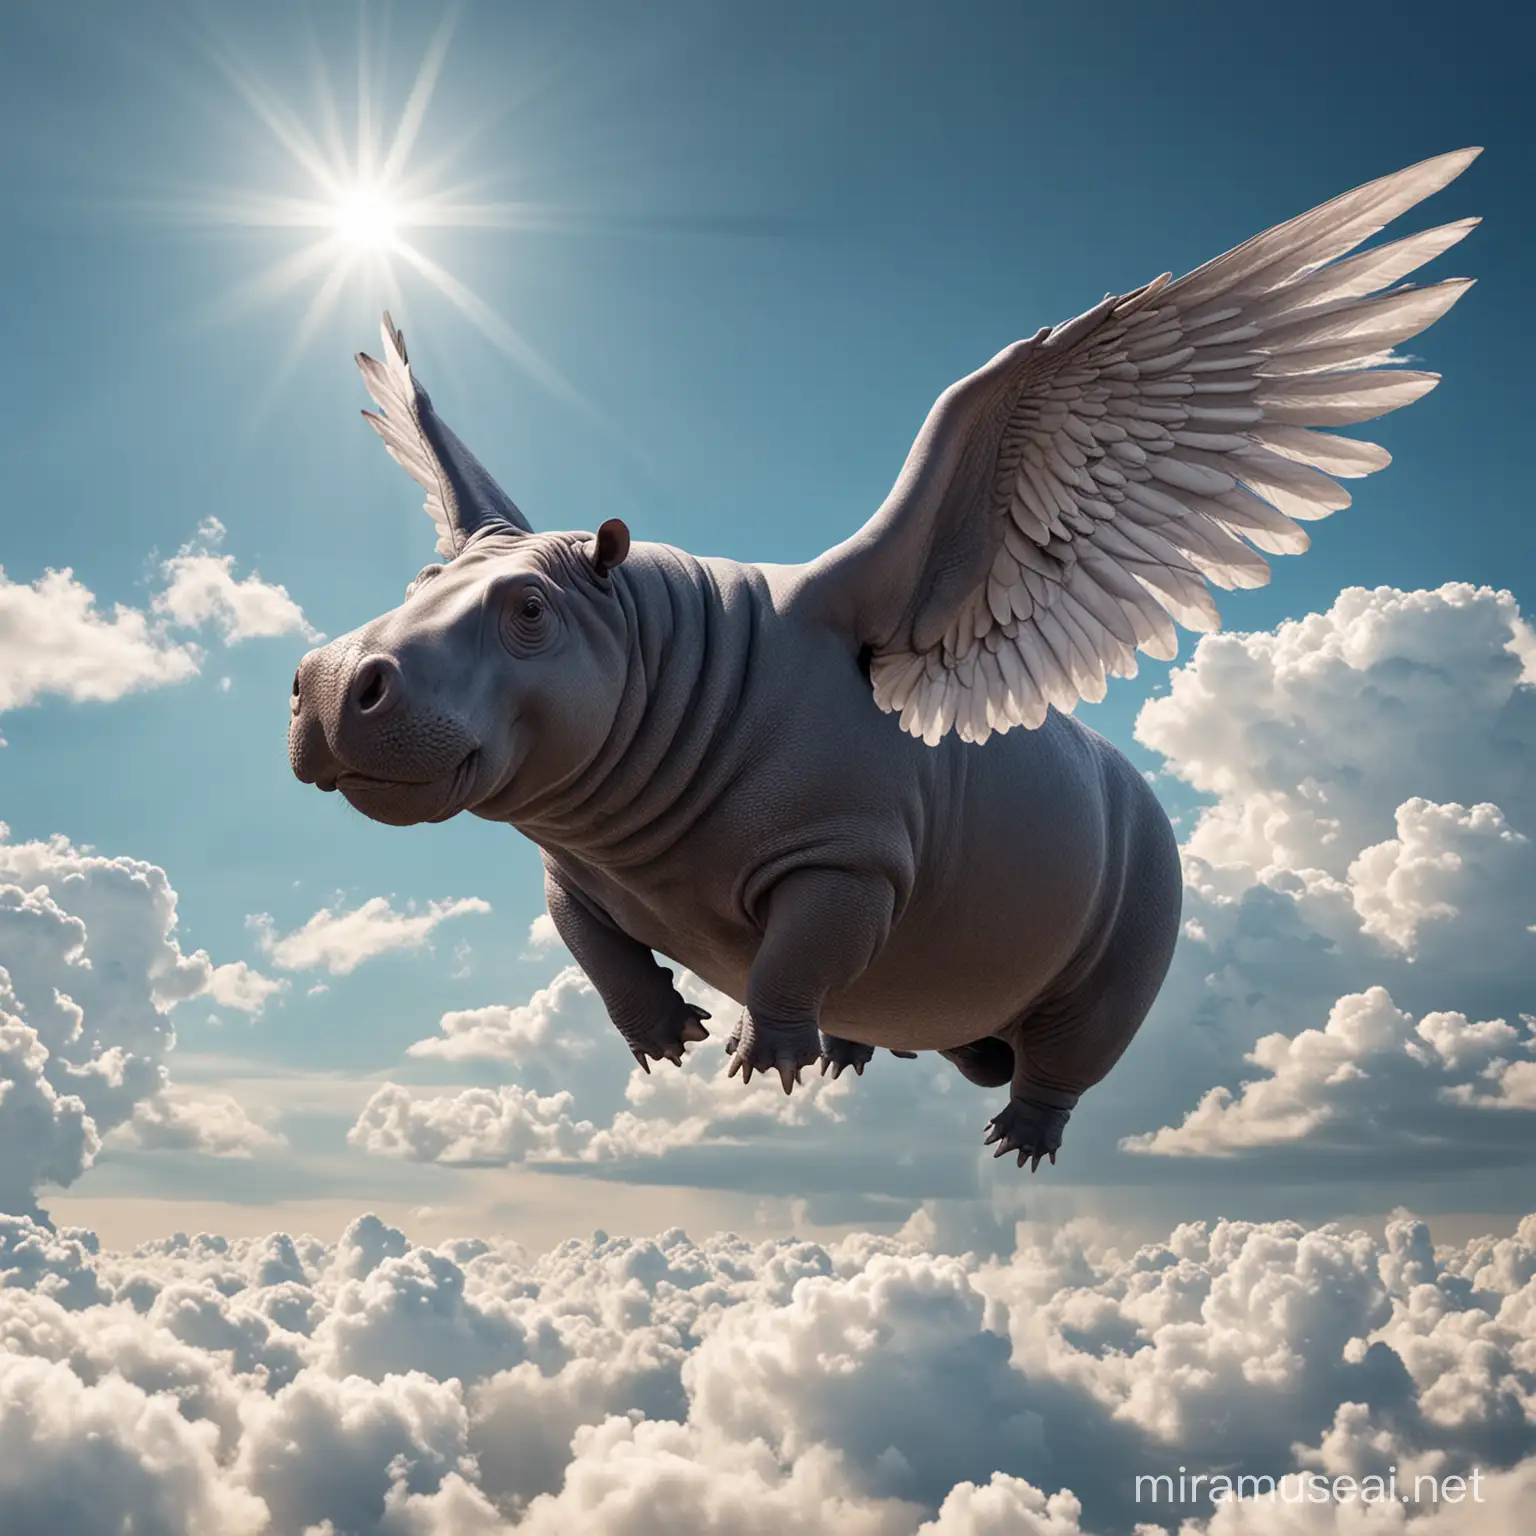 Flying Hippopotamus with Majestic Wings Soaring in the Sky